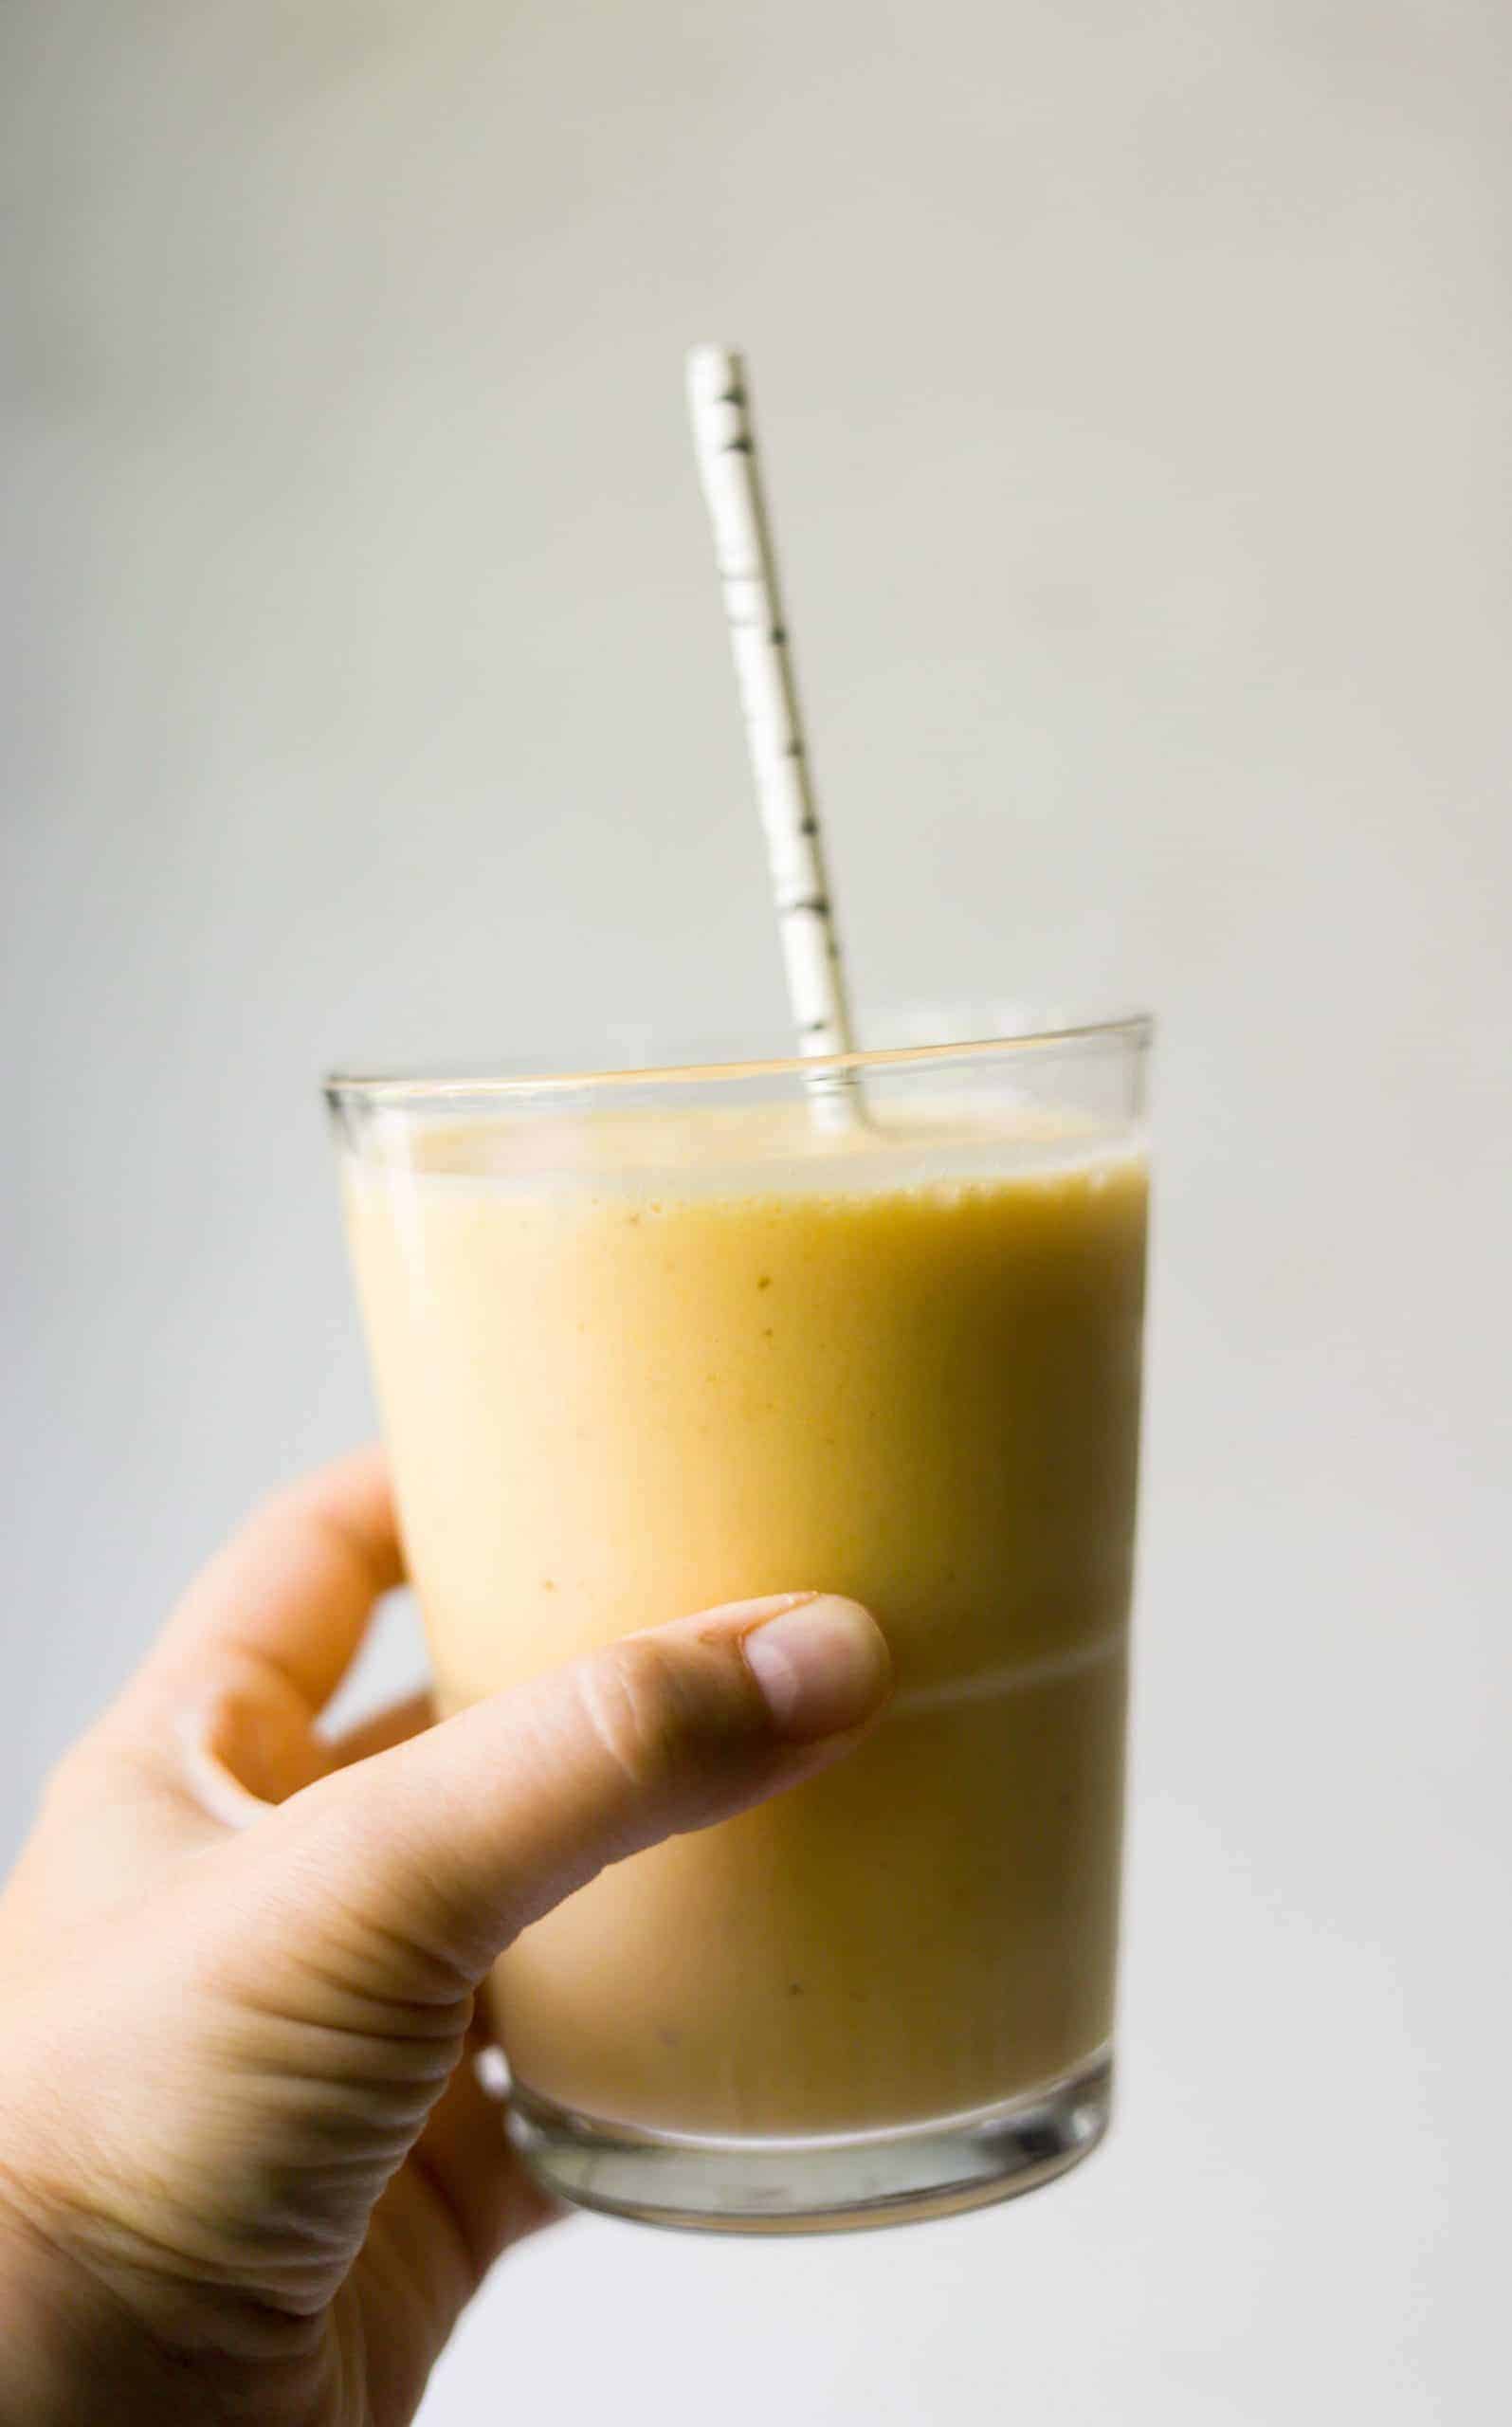 A hand holding a glass of banana peach smoothie.